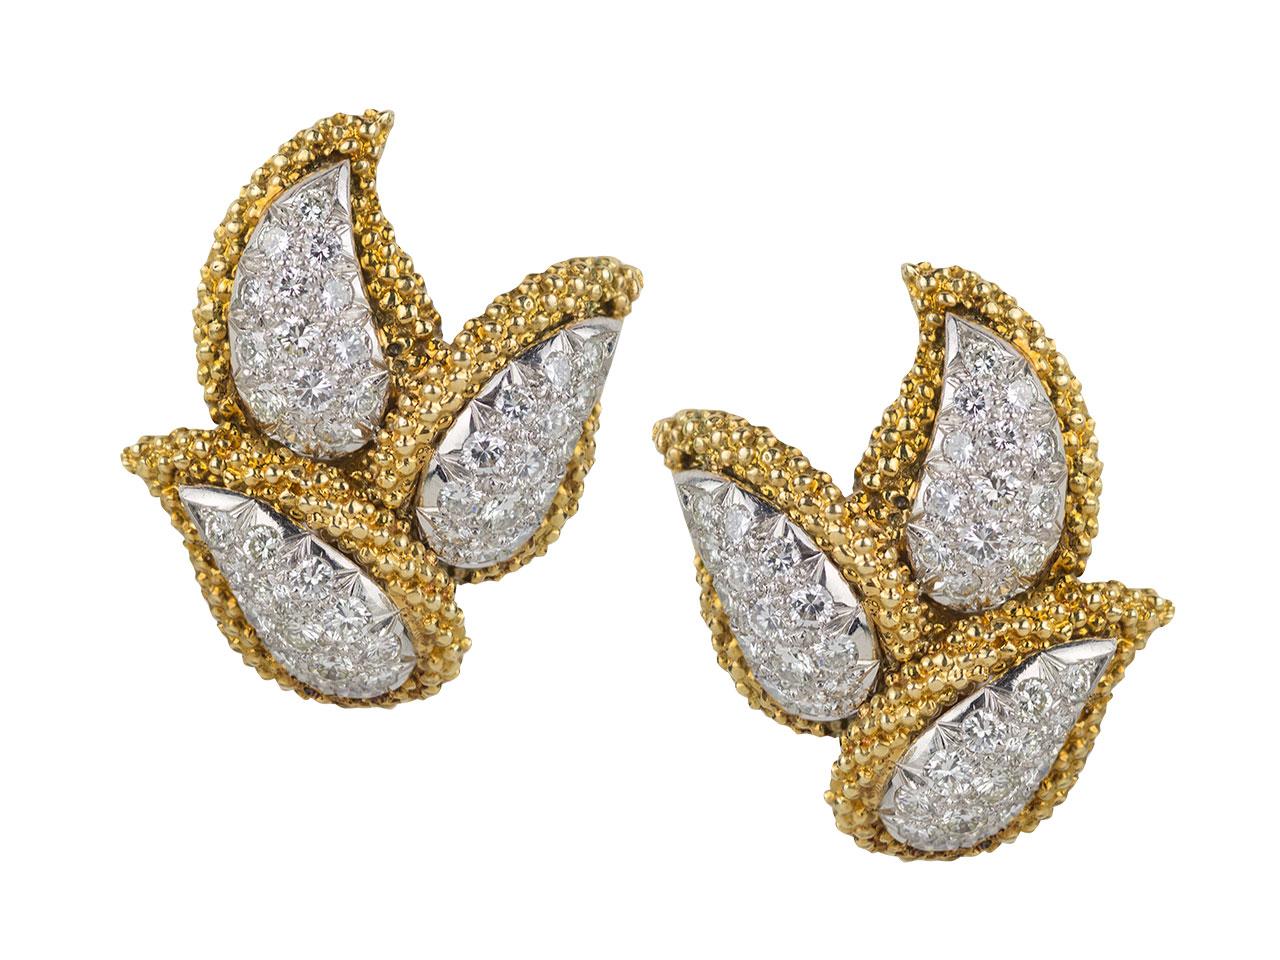 18k gold and diamond Earclips by Marianne Ostier. Bottom leaf is detachable. Signed M O. 18k